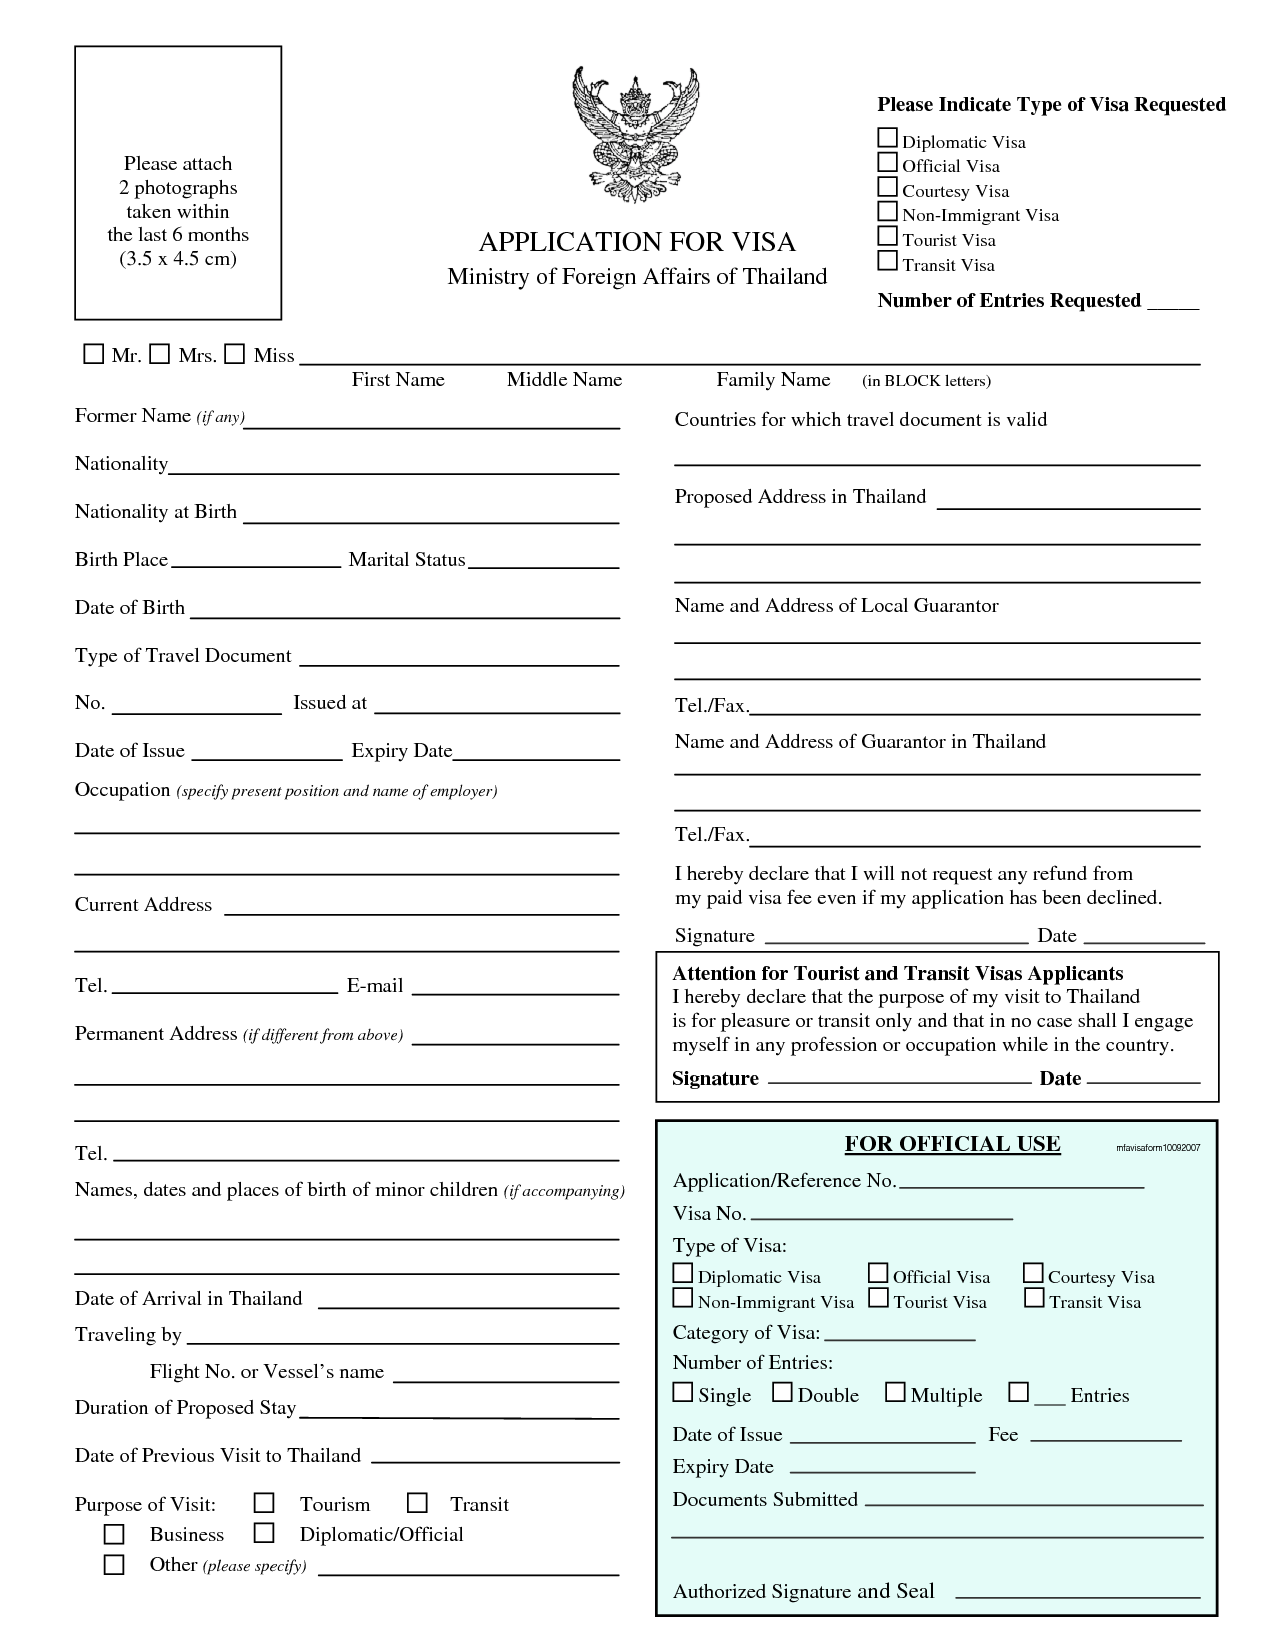 application form.png